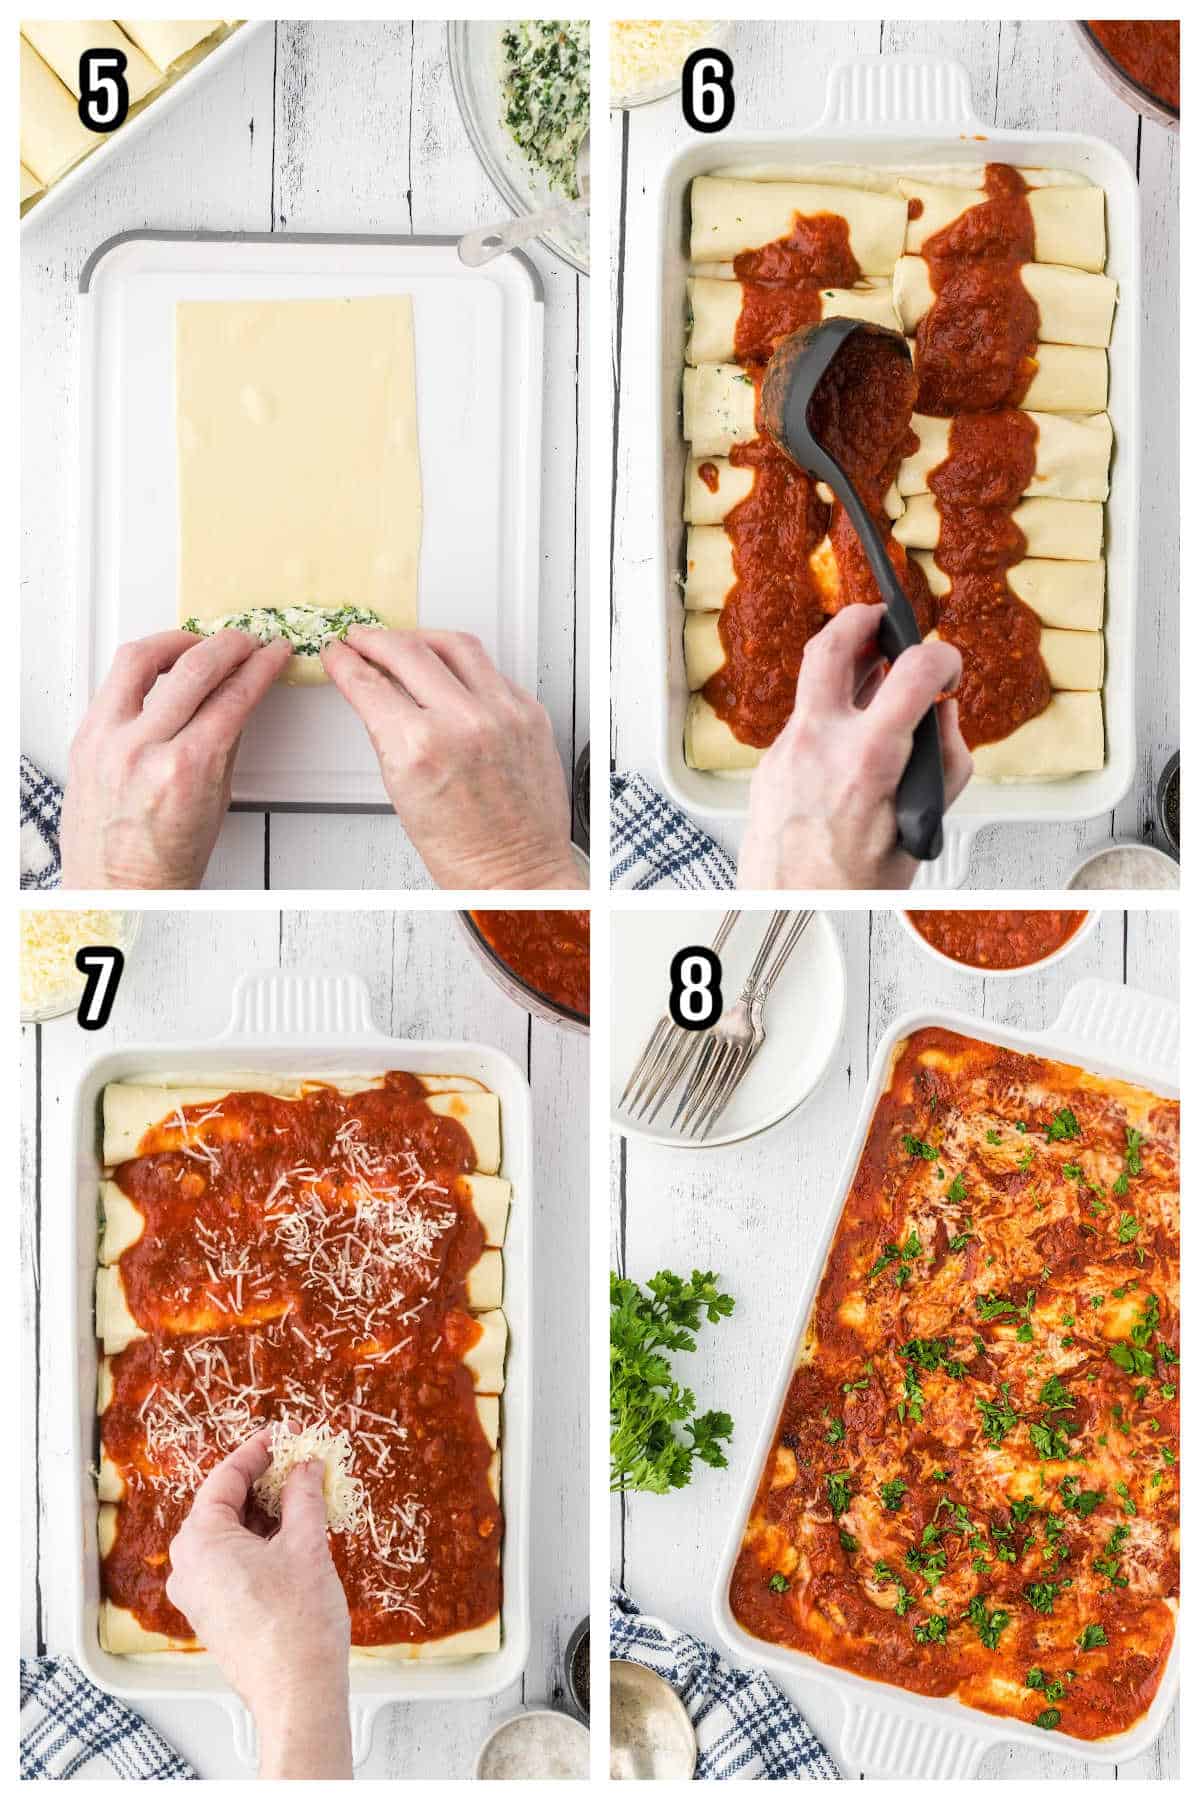 The second collage with steps five to eight for making the Spinach and Cheese Cannelloni recipe. 